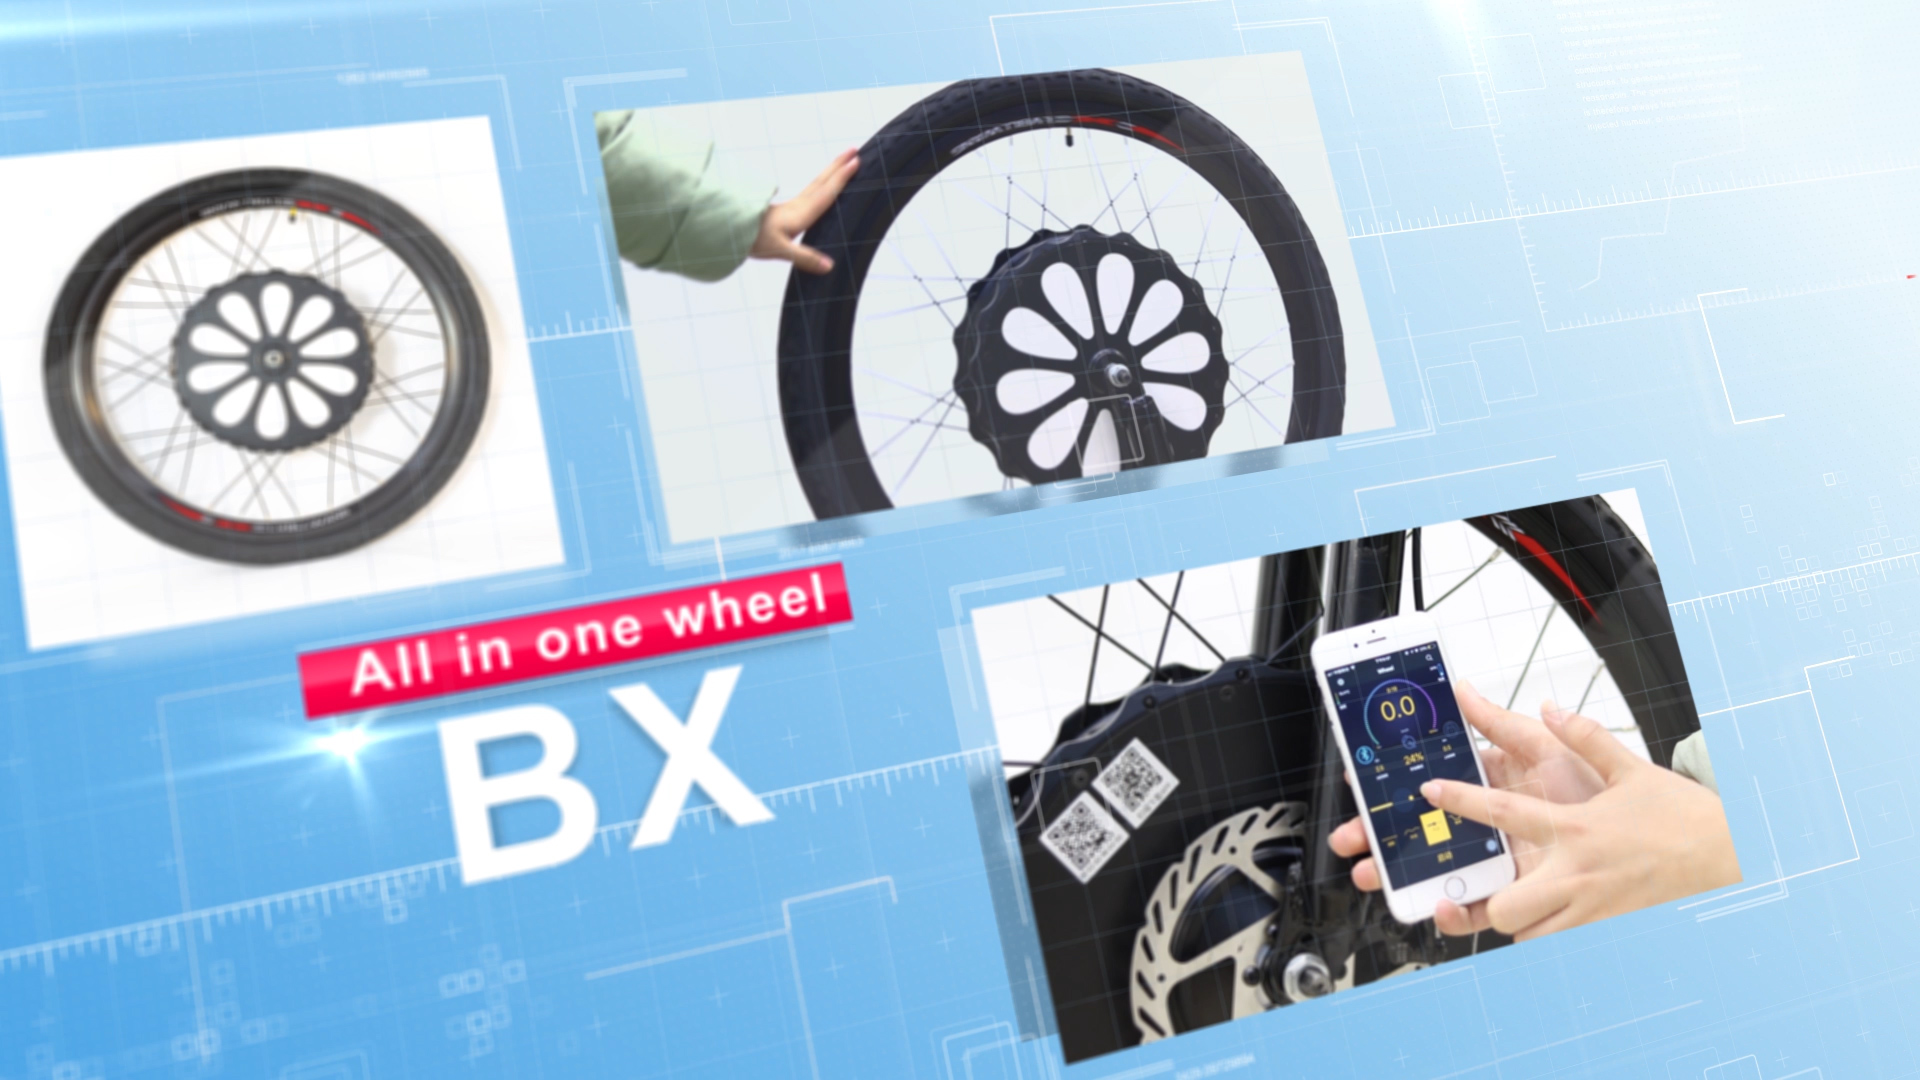 BX BY BT Promotional Video-electric bike kit front wheel